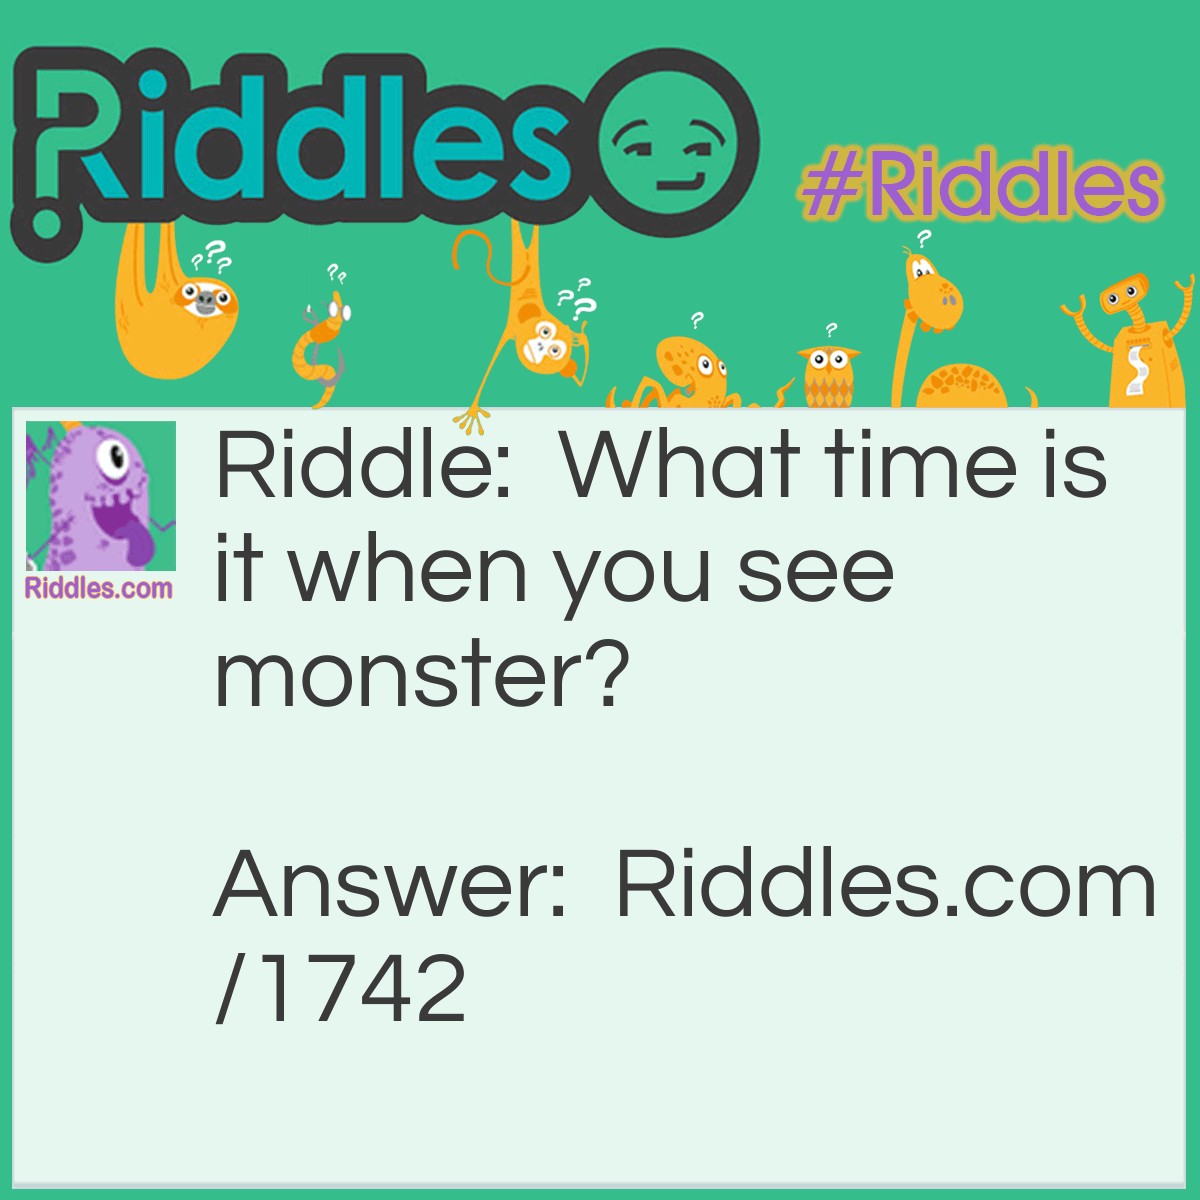 Riddle: What time is it when you see the monster? Answer: Time to run.